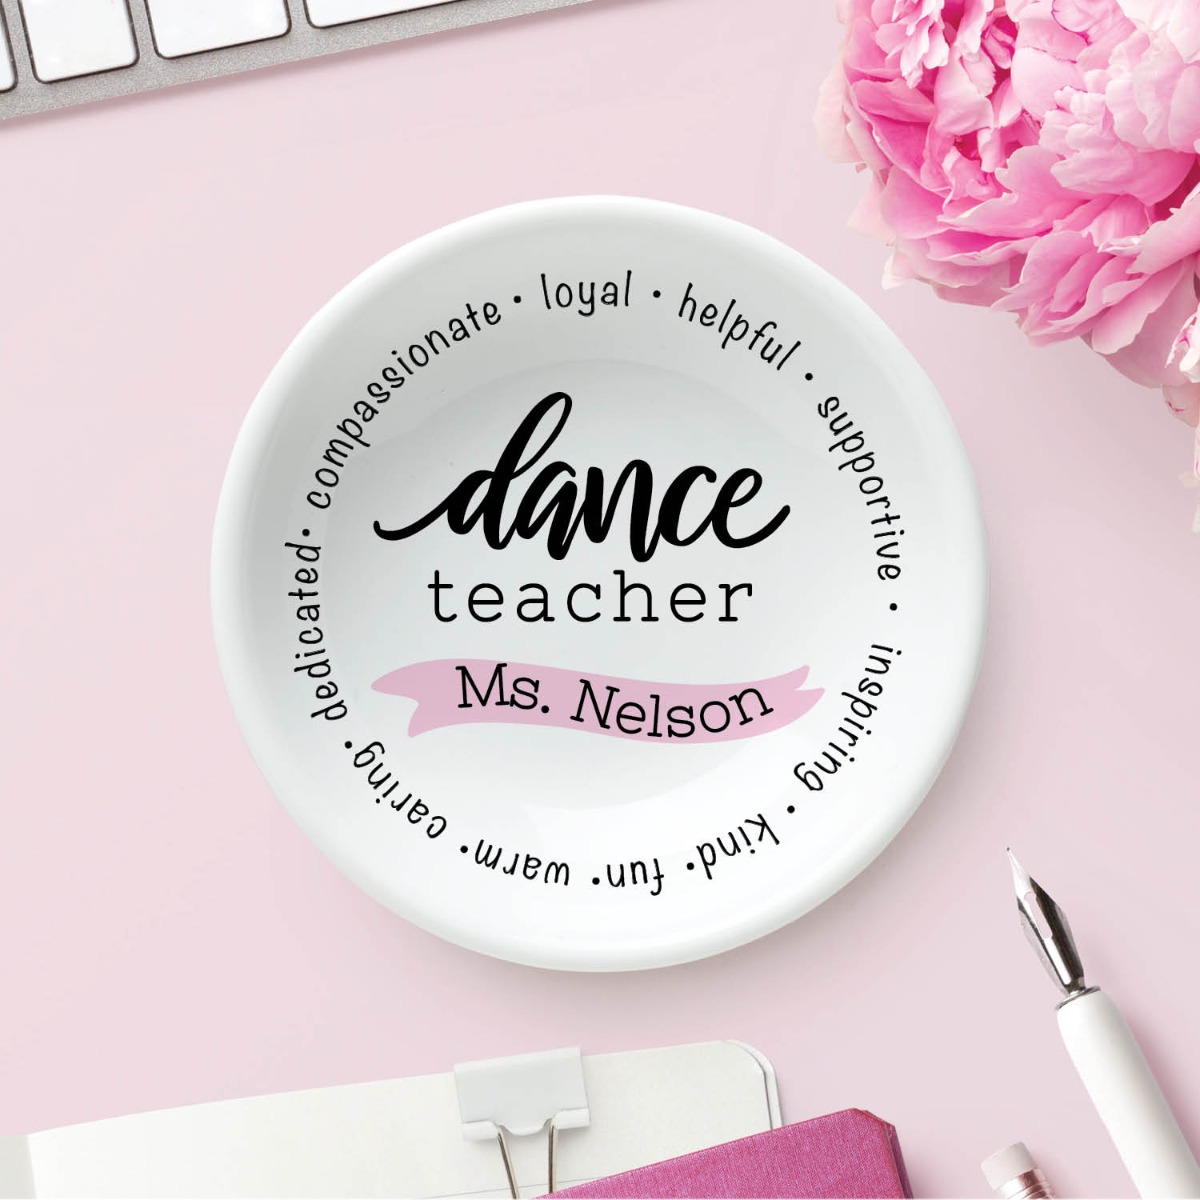 Special dance teacher round trinket dish with a name